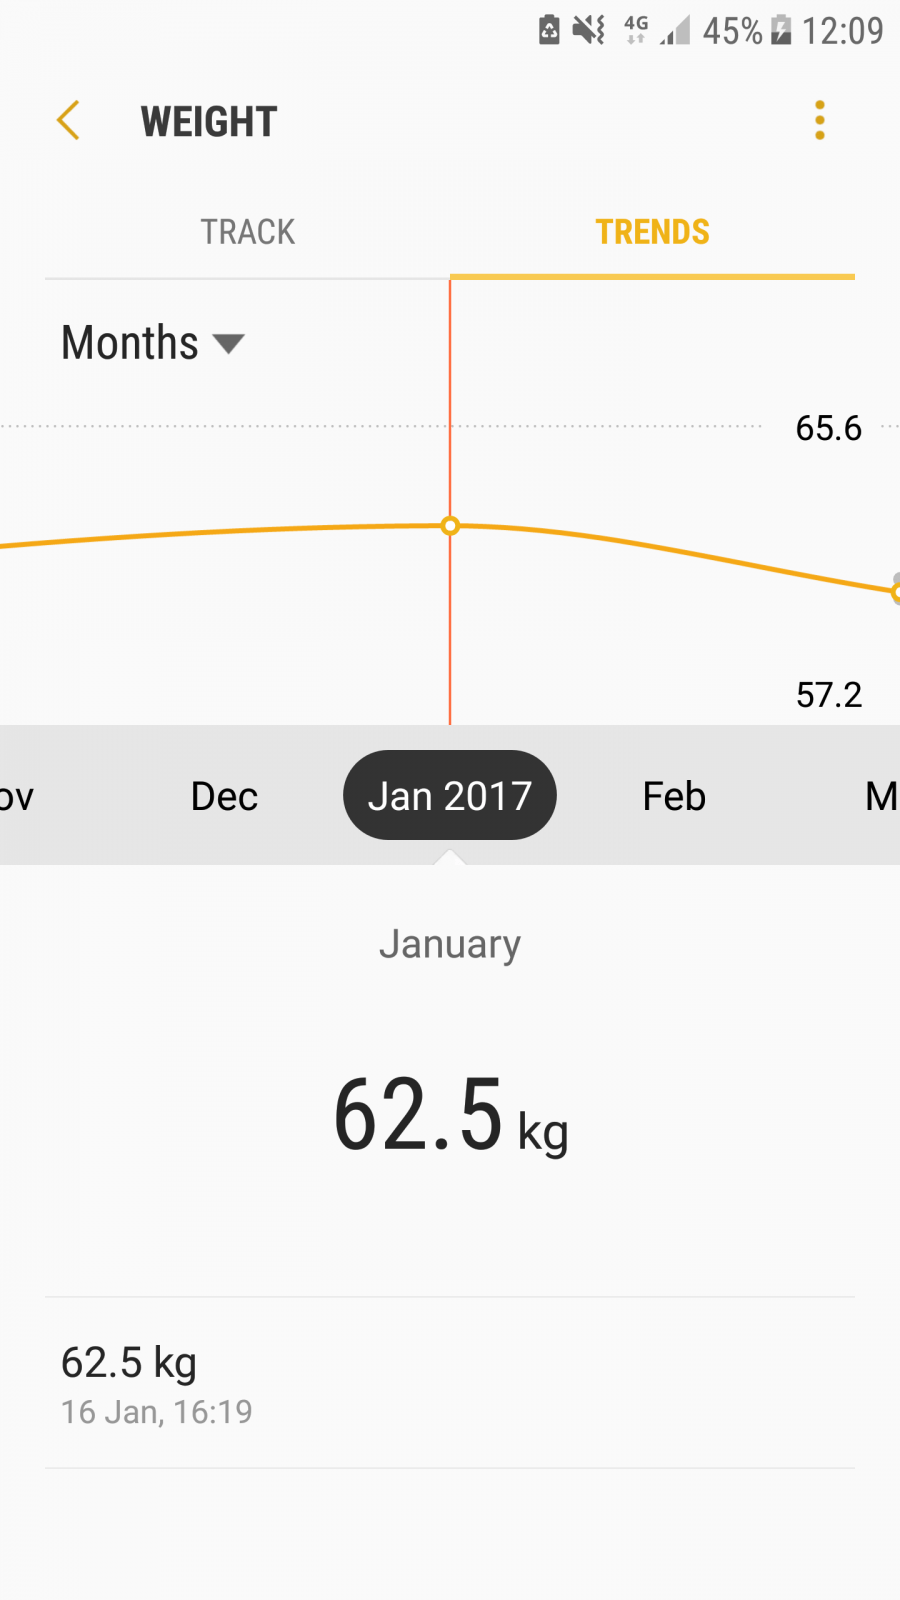 Weight loss journey January